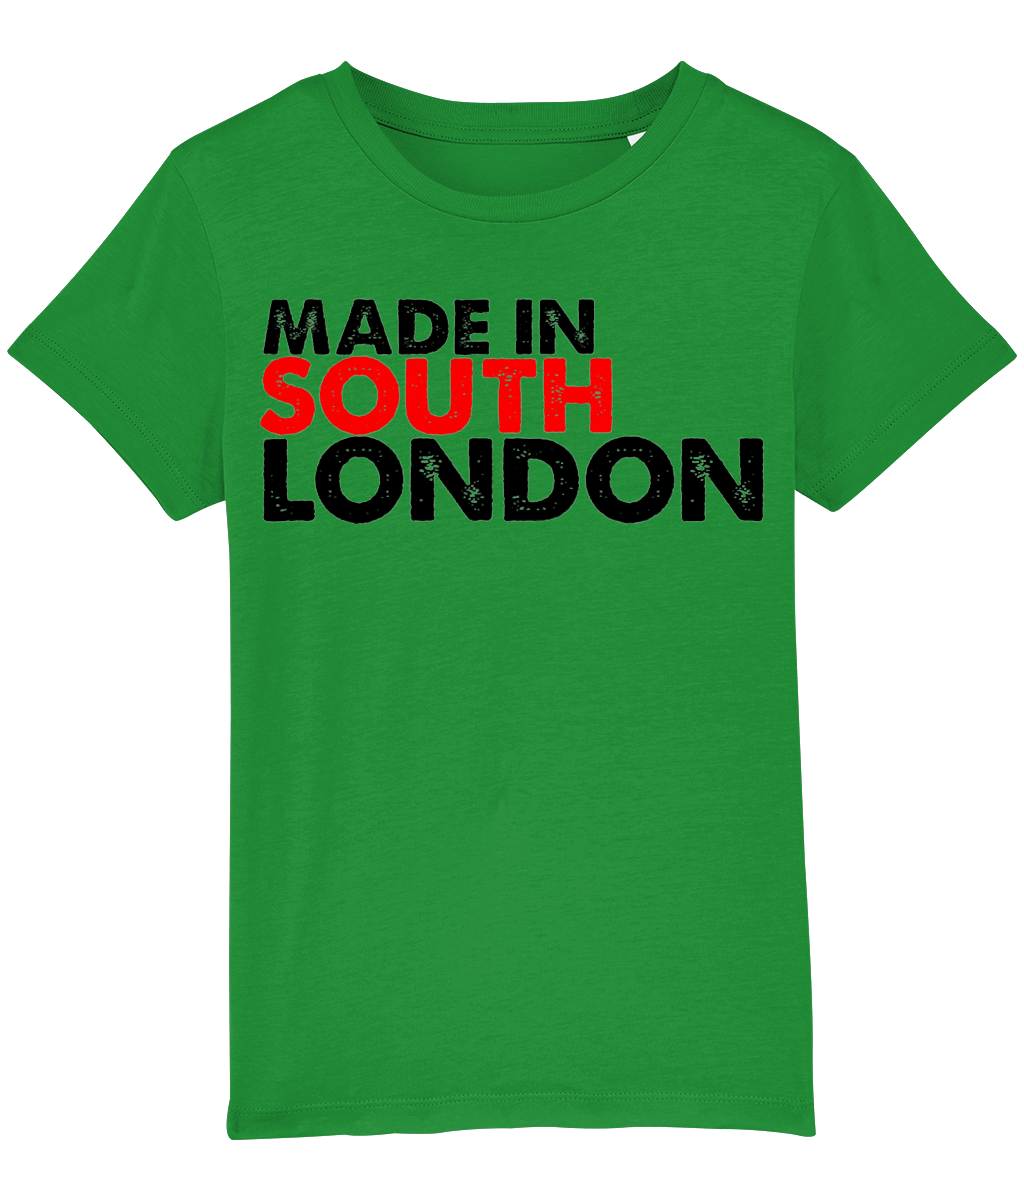 Made in South London Kids T-Shirt